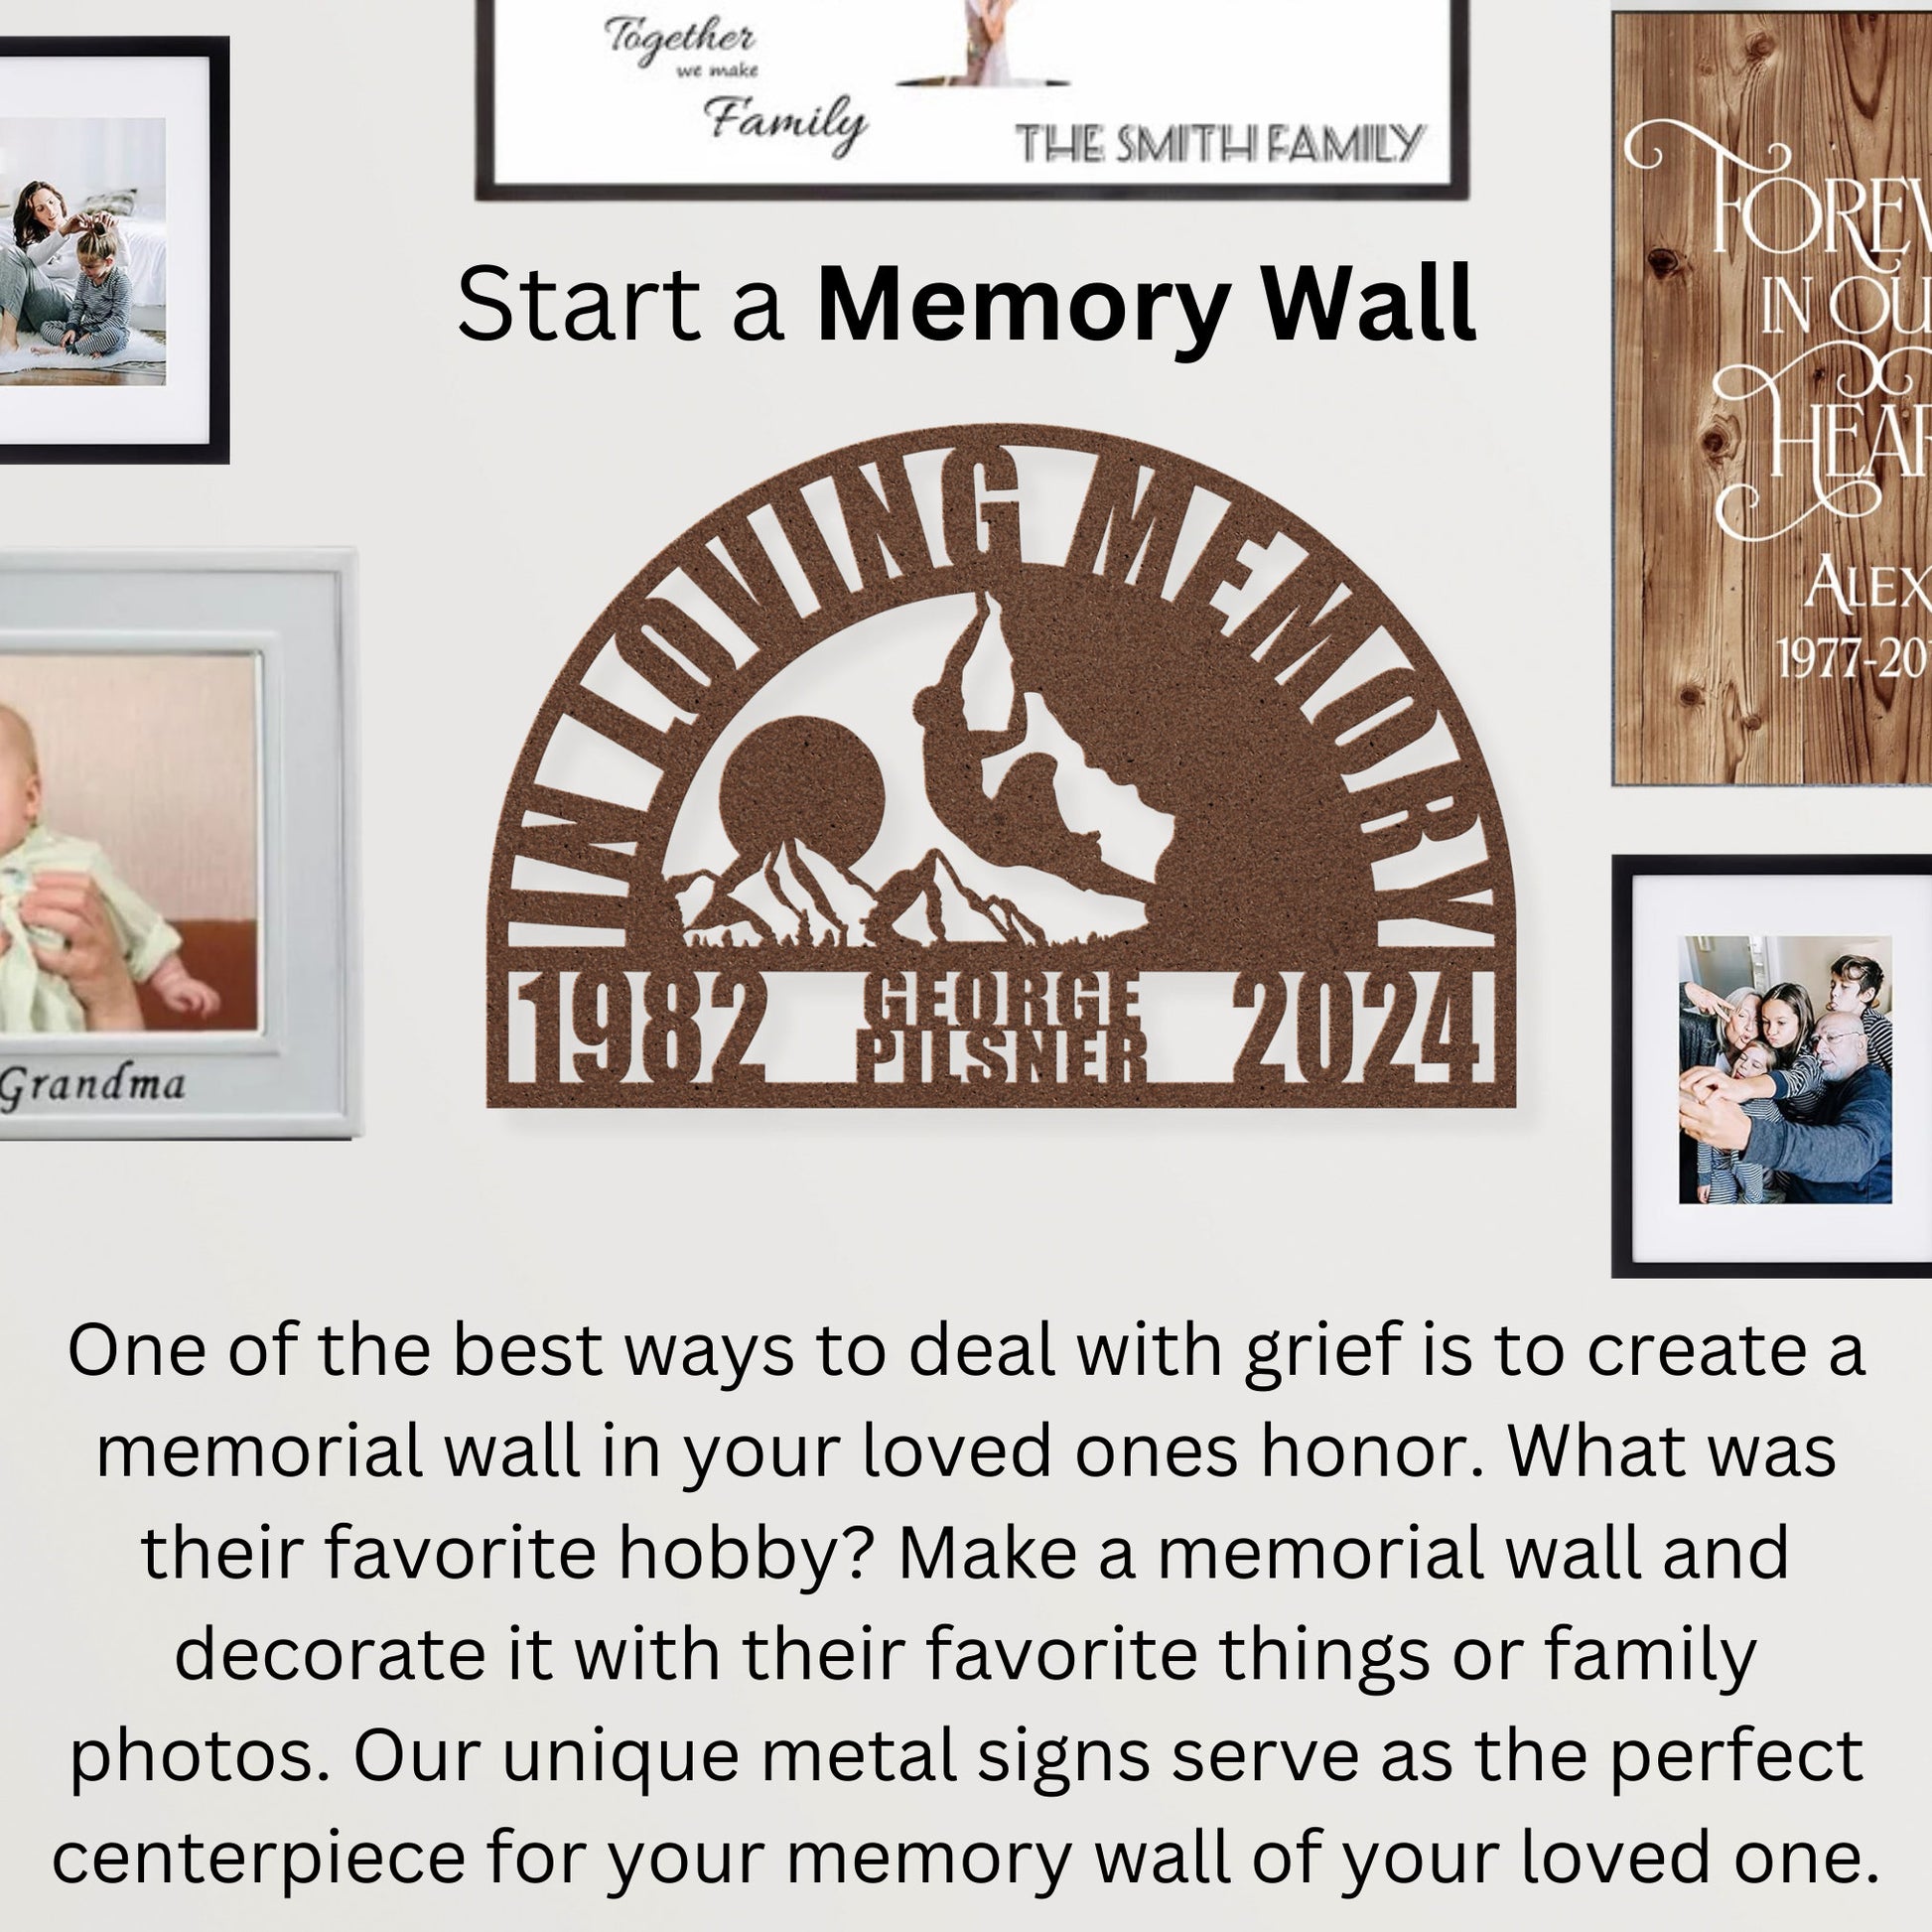 Unique Rock Climbing Memorial Gift for Rock Climber Outdoorsman - Personalized In Loving Memory Wall Sign Nature Remembrance Sympathy Gift